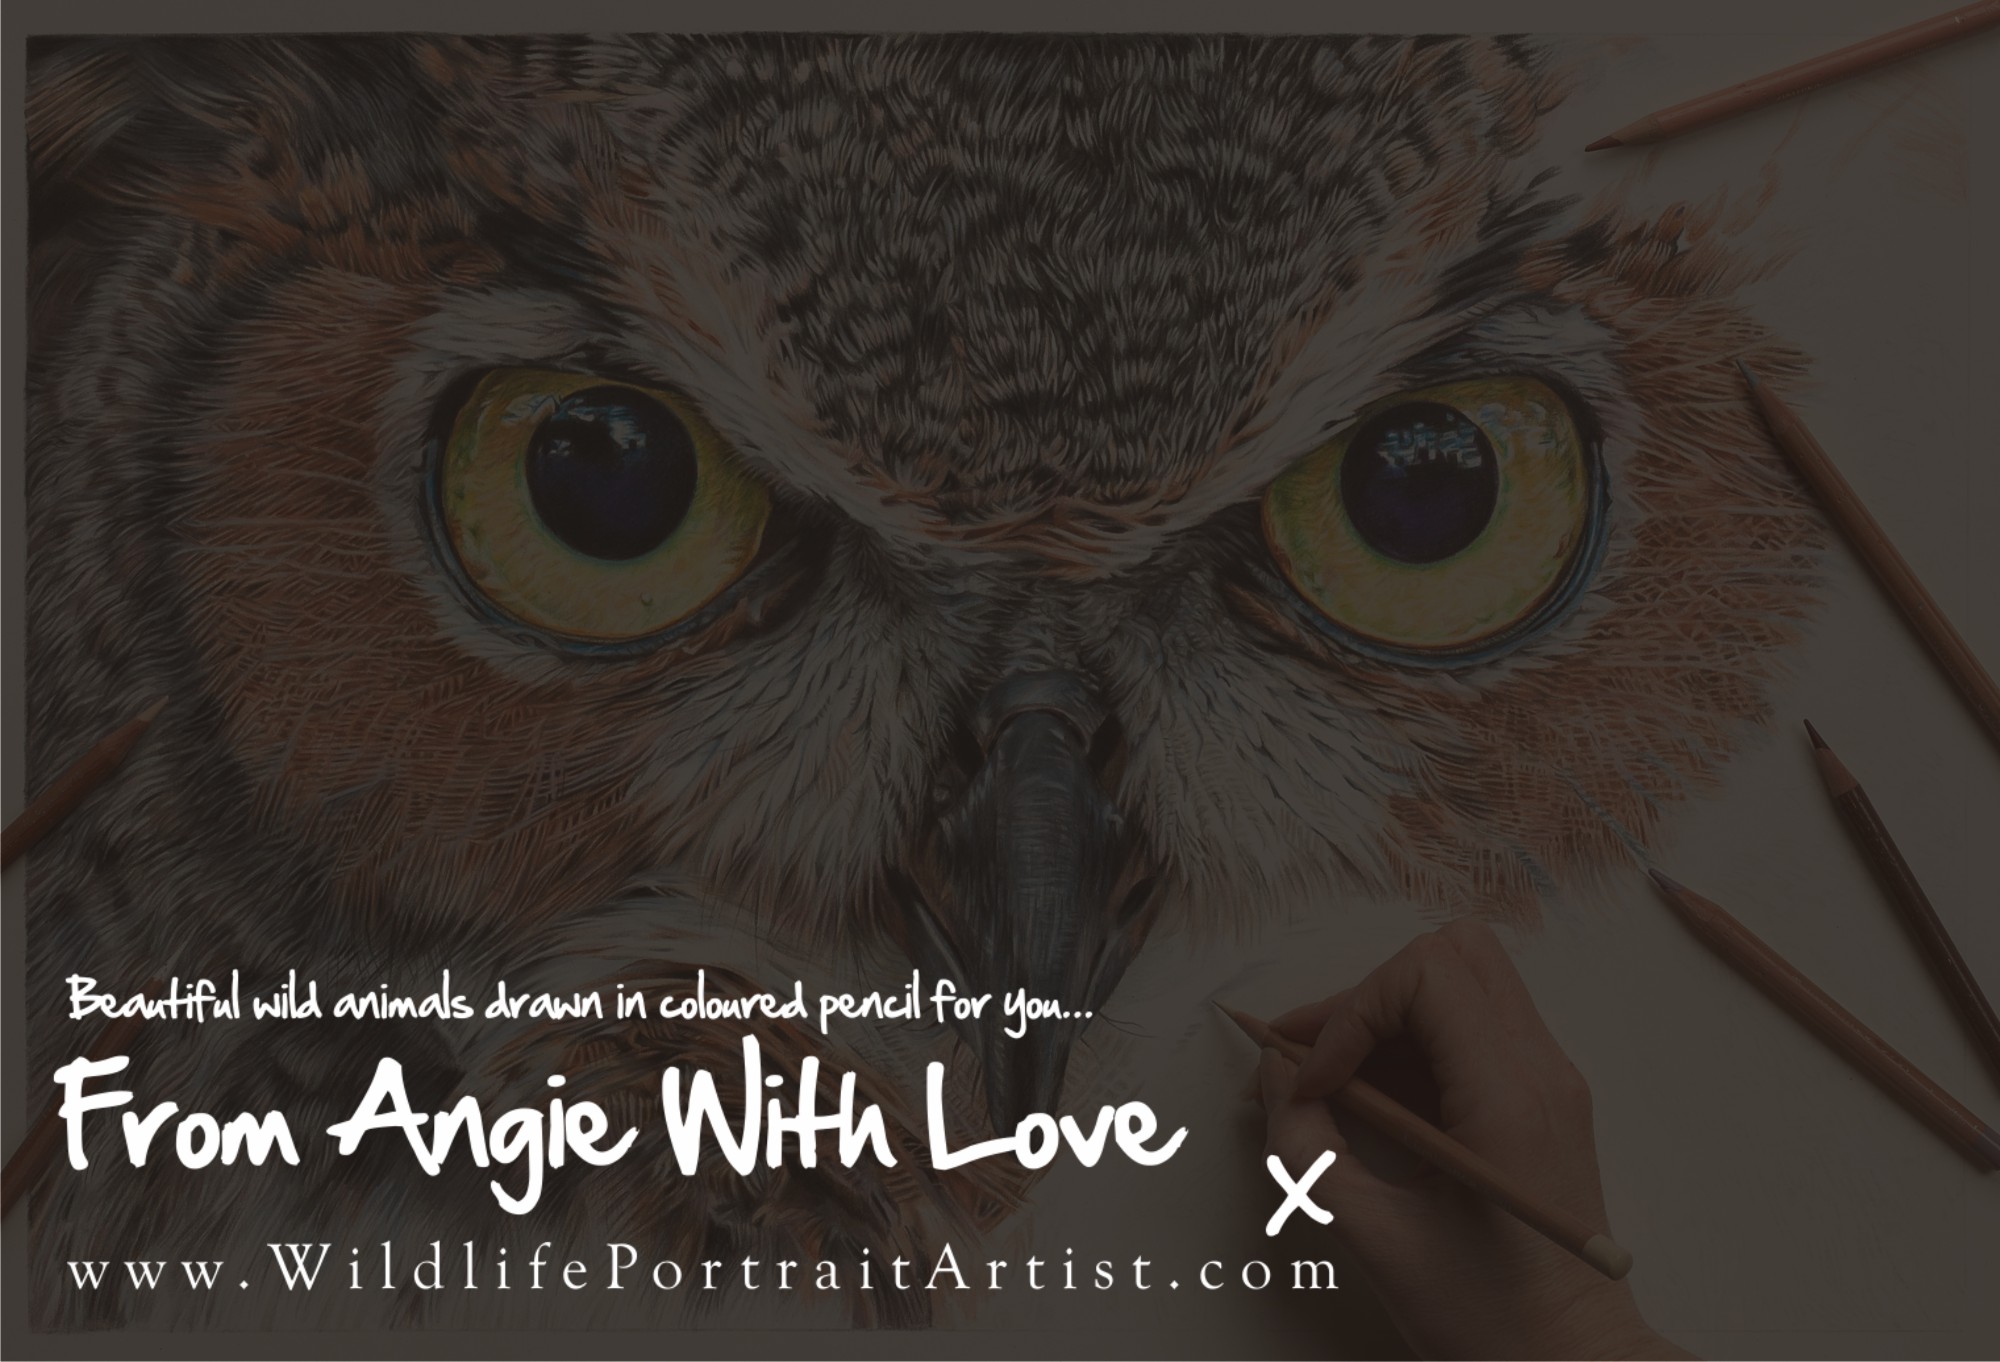 Beautiful animals drawn in coloured pencil, from wildlife portrait artist Angie, with love x